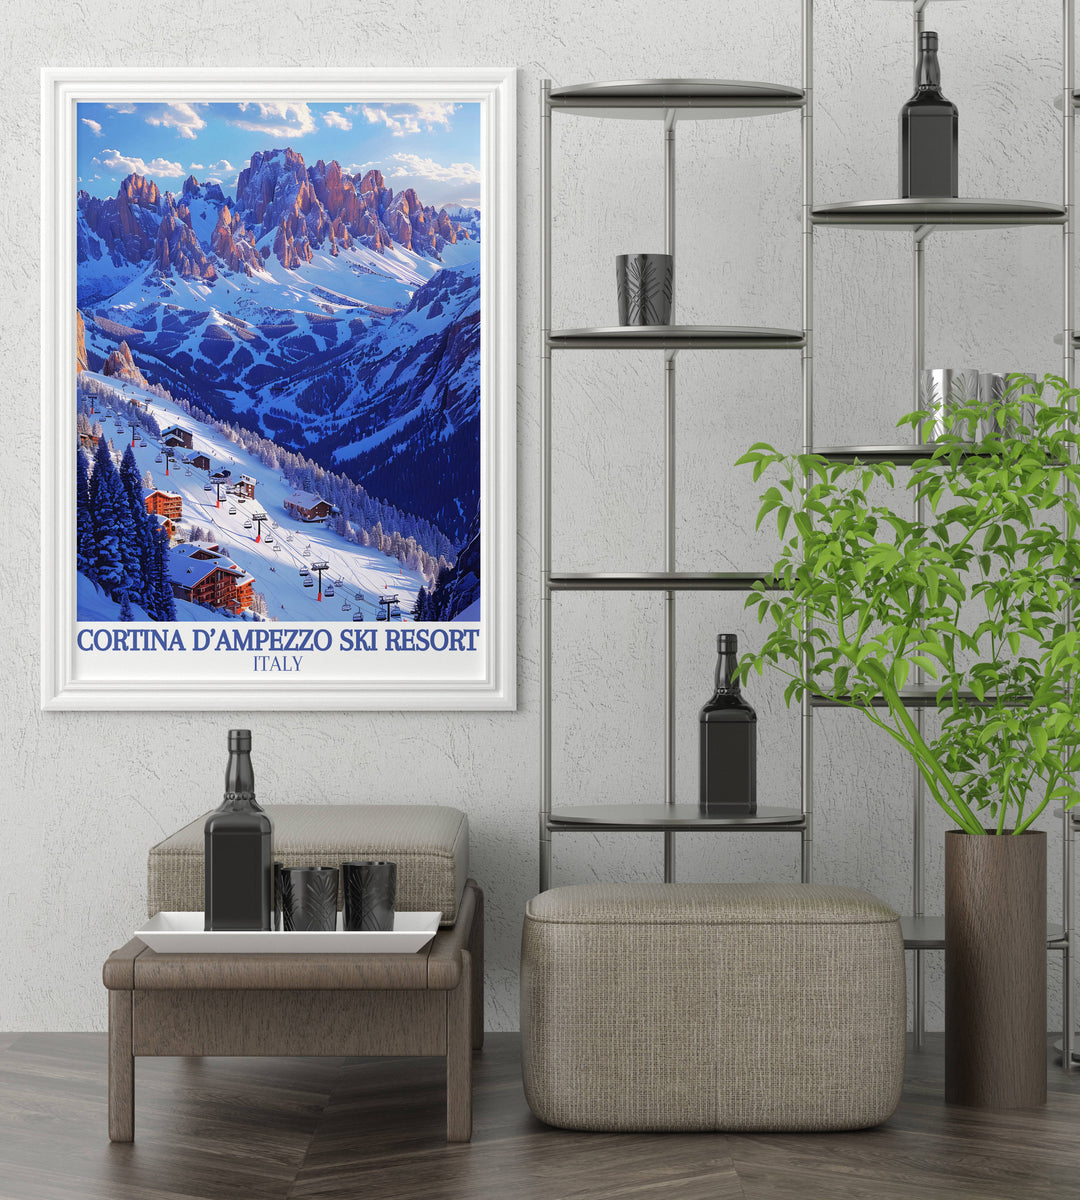 Early morning light casting shadows on the ski slopes of Tofana, adding a serene beauty to this wall art piece